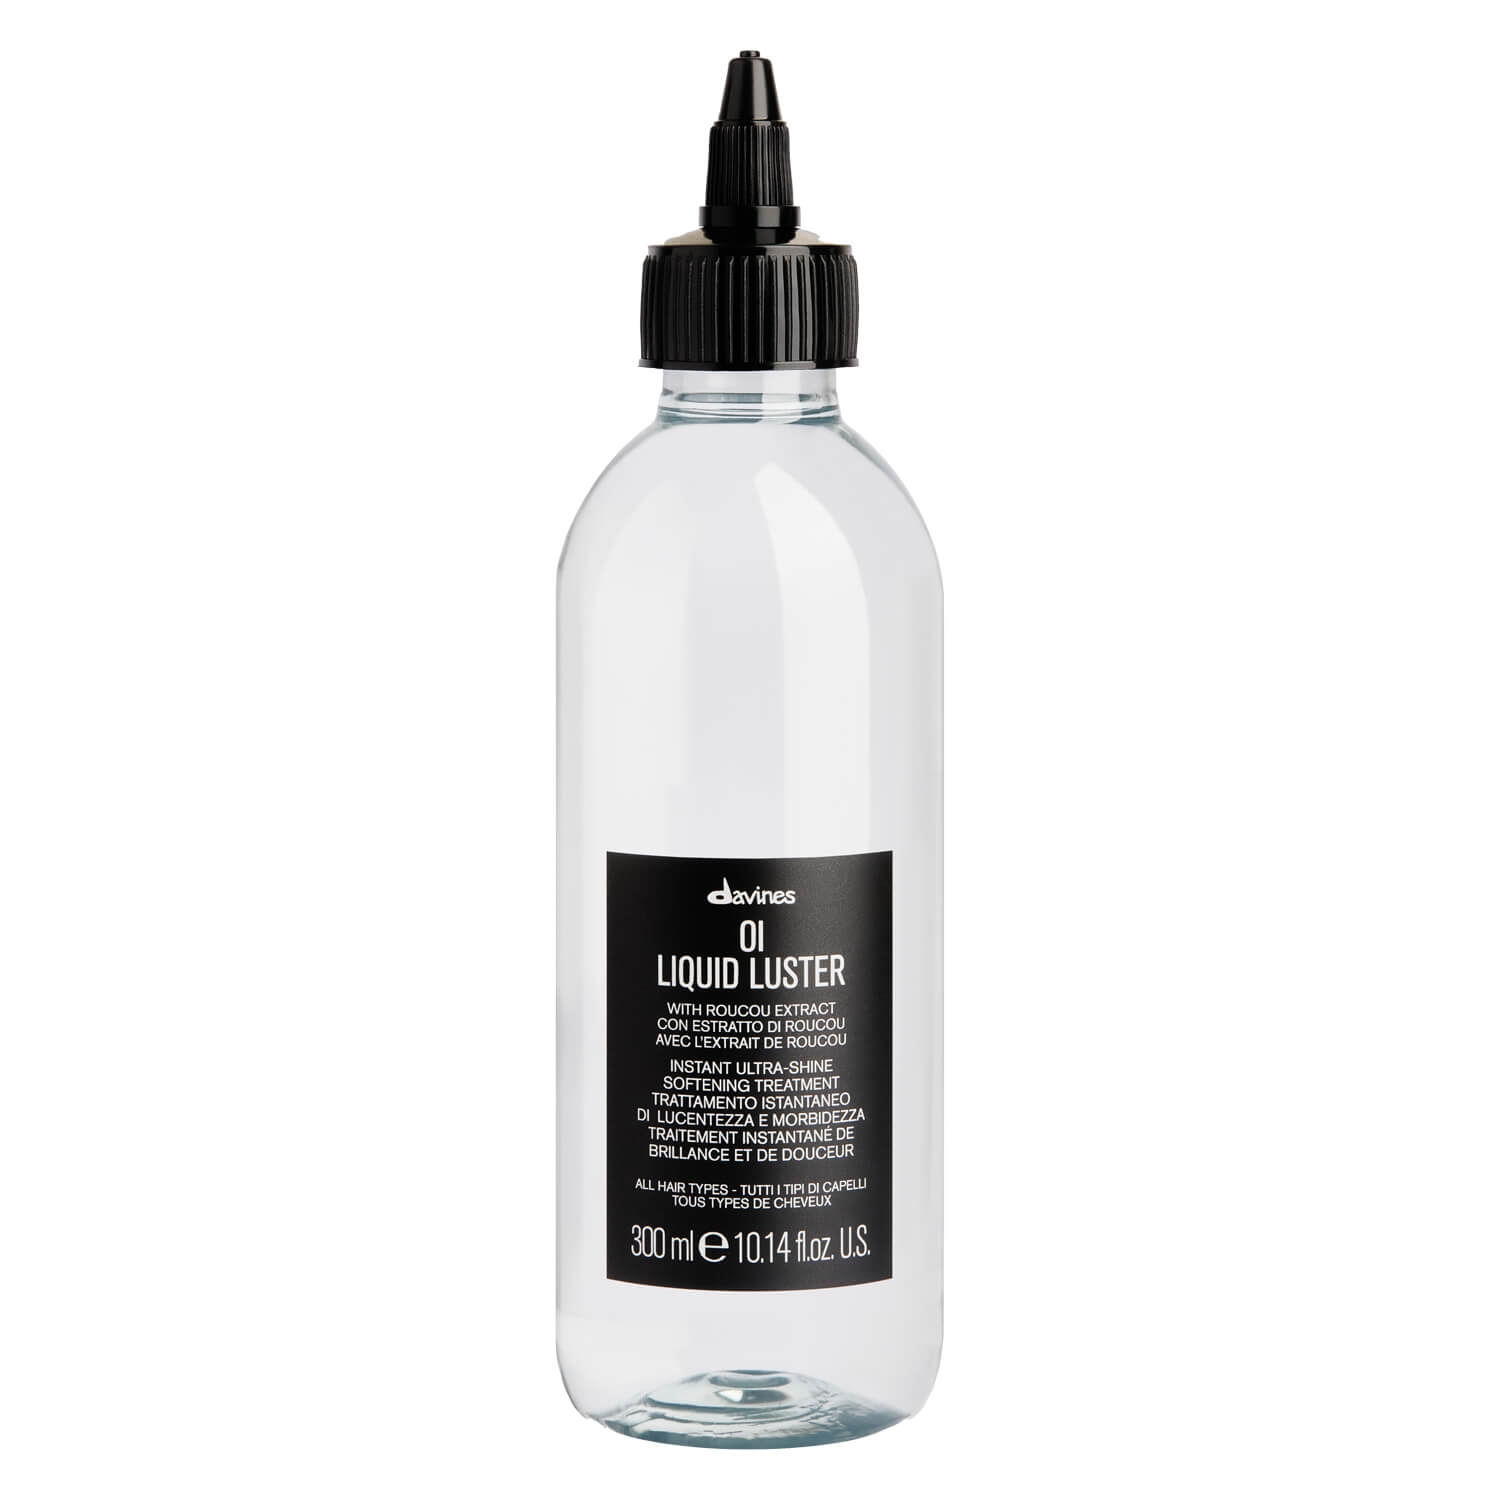 Product image from Oi - Liquid Luster